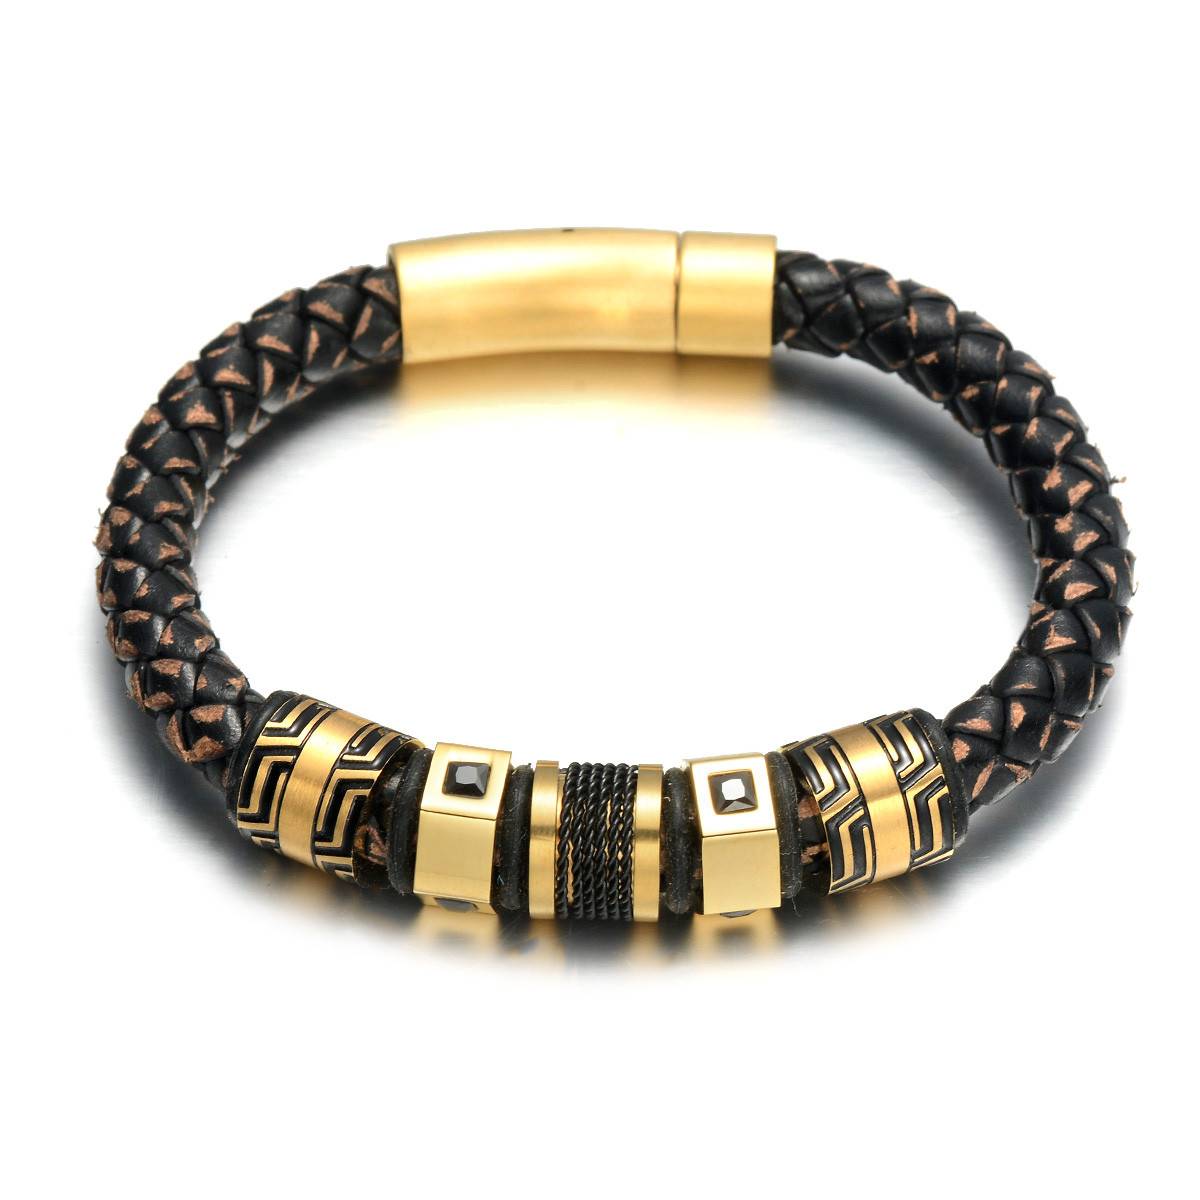 Braided Leather Bracelet With Beads | Jewelry Addicts